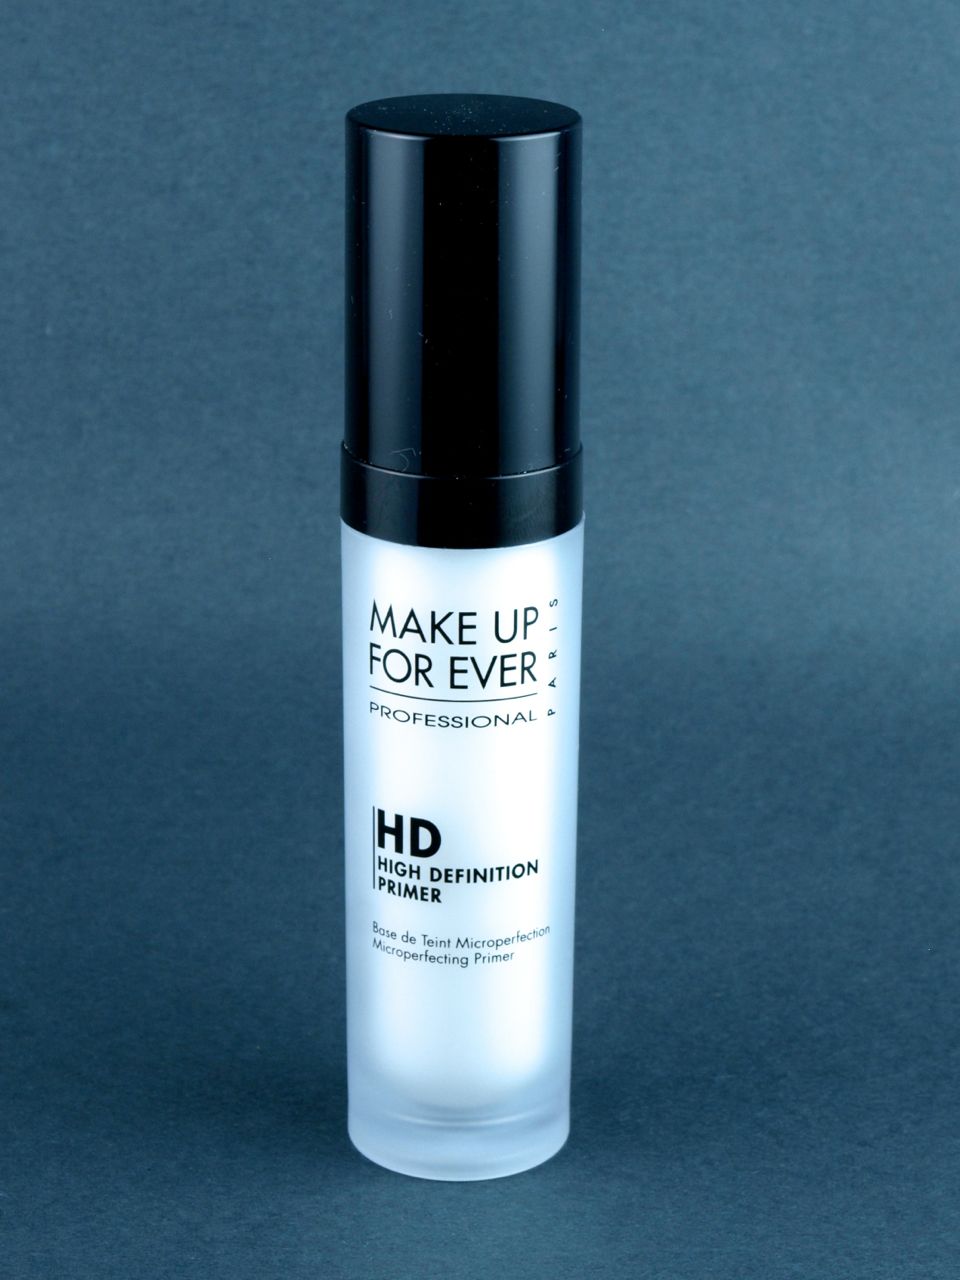 Make Up For Ever HD High Definition Primer in "0 Neutral": Review and Swatches